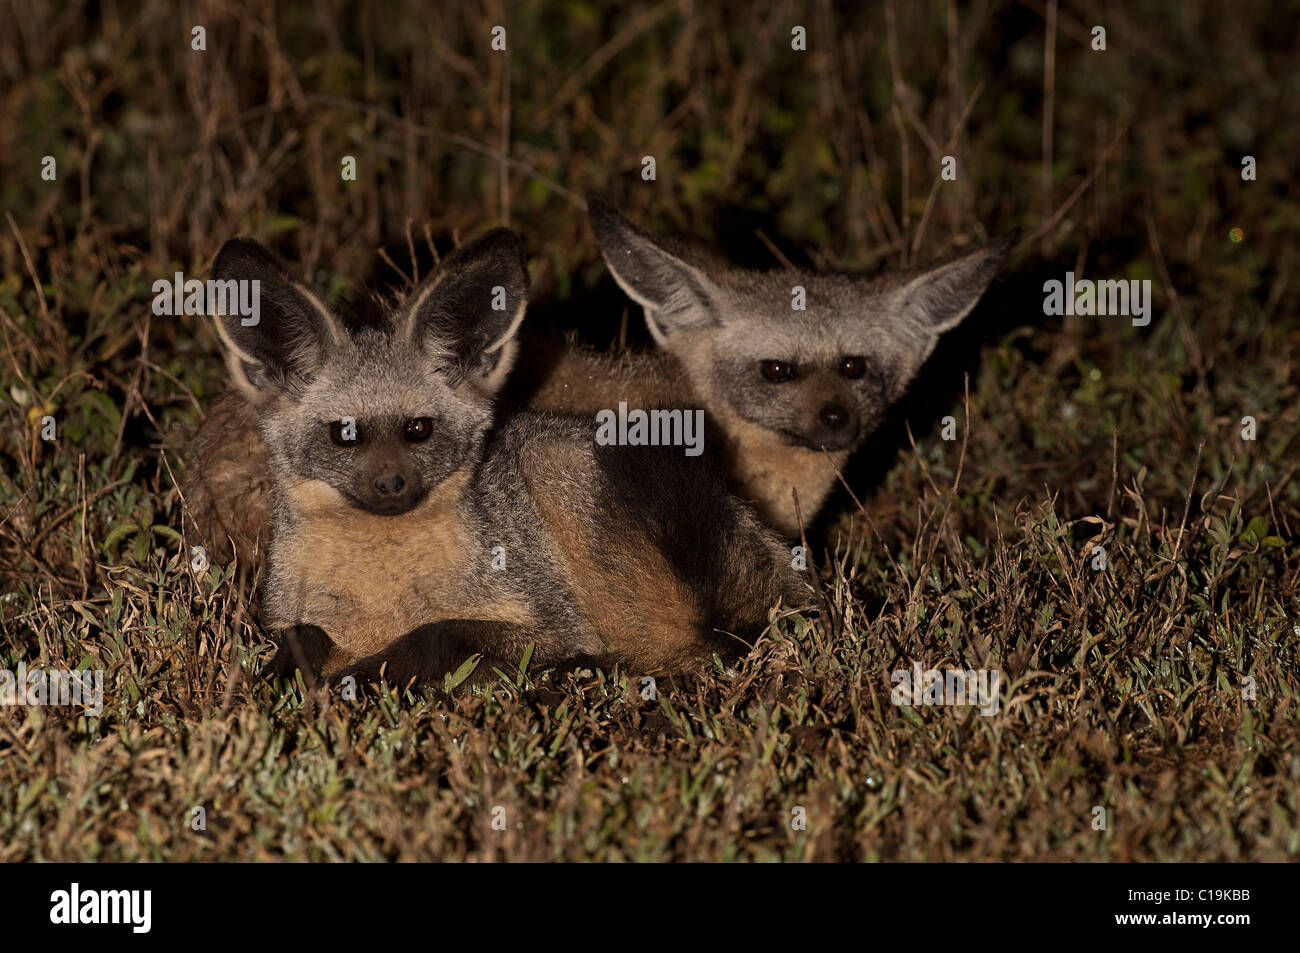 Stock photo of two bat eared fox sitting by their den at dawn. Stock Photo